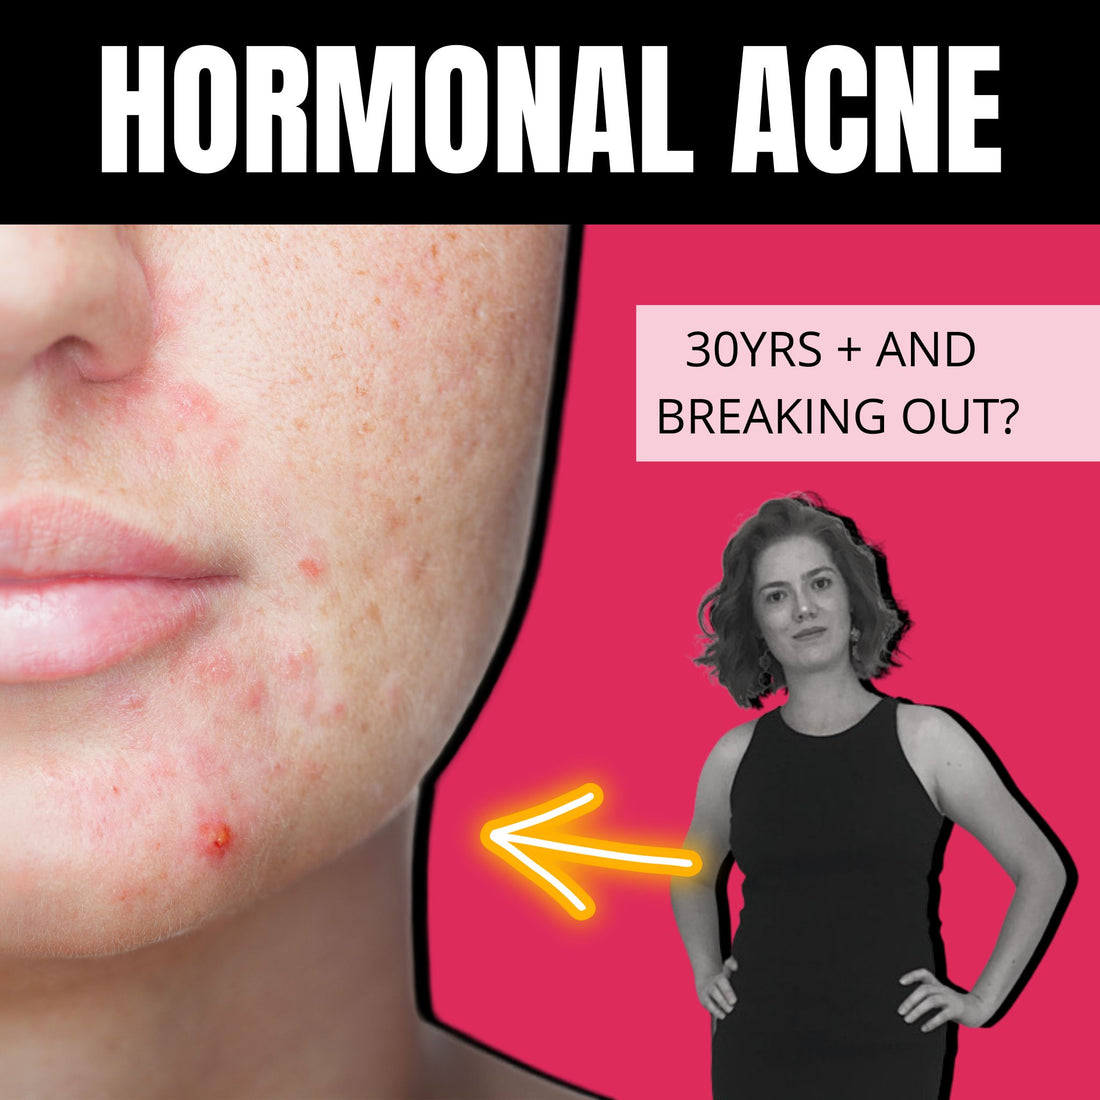 Hormonal acne skincare solutions for clear skin